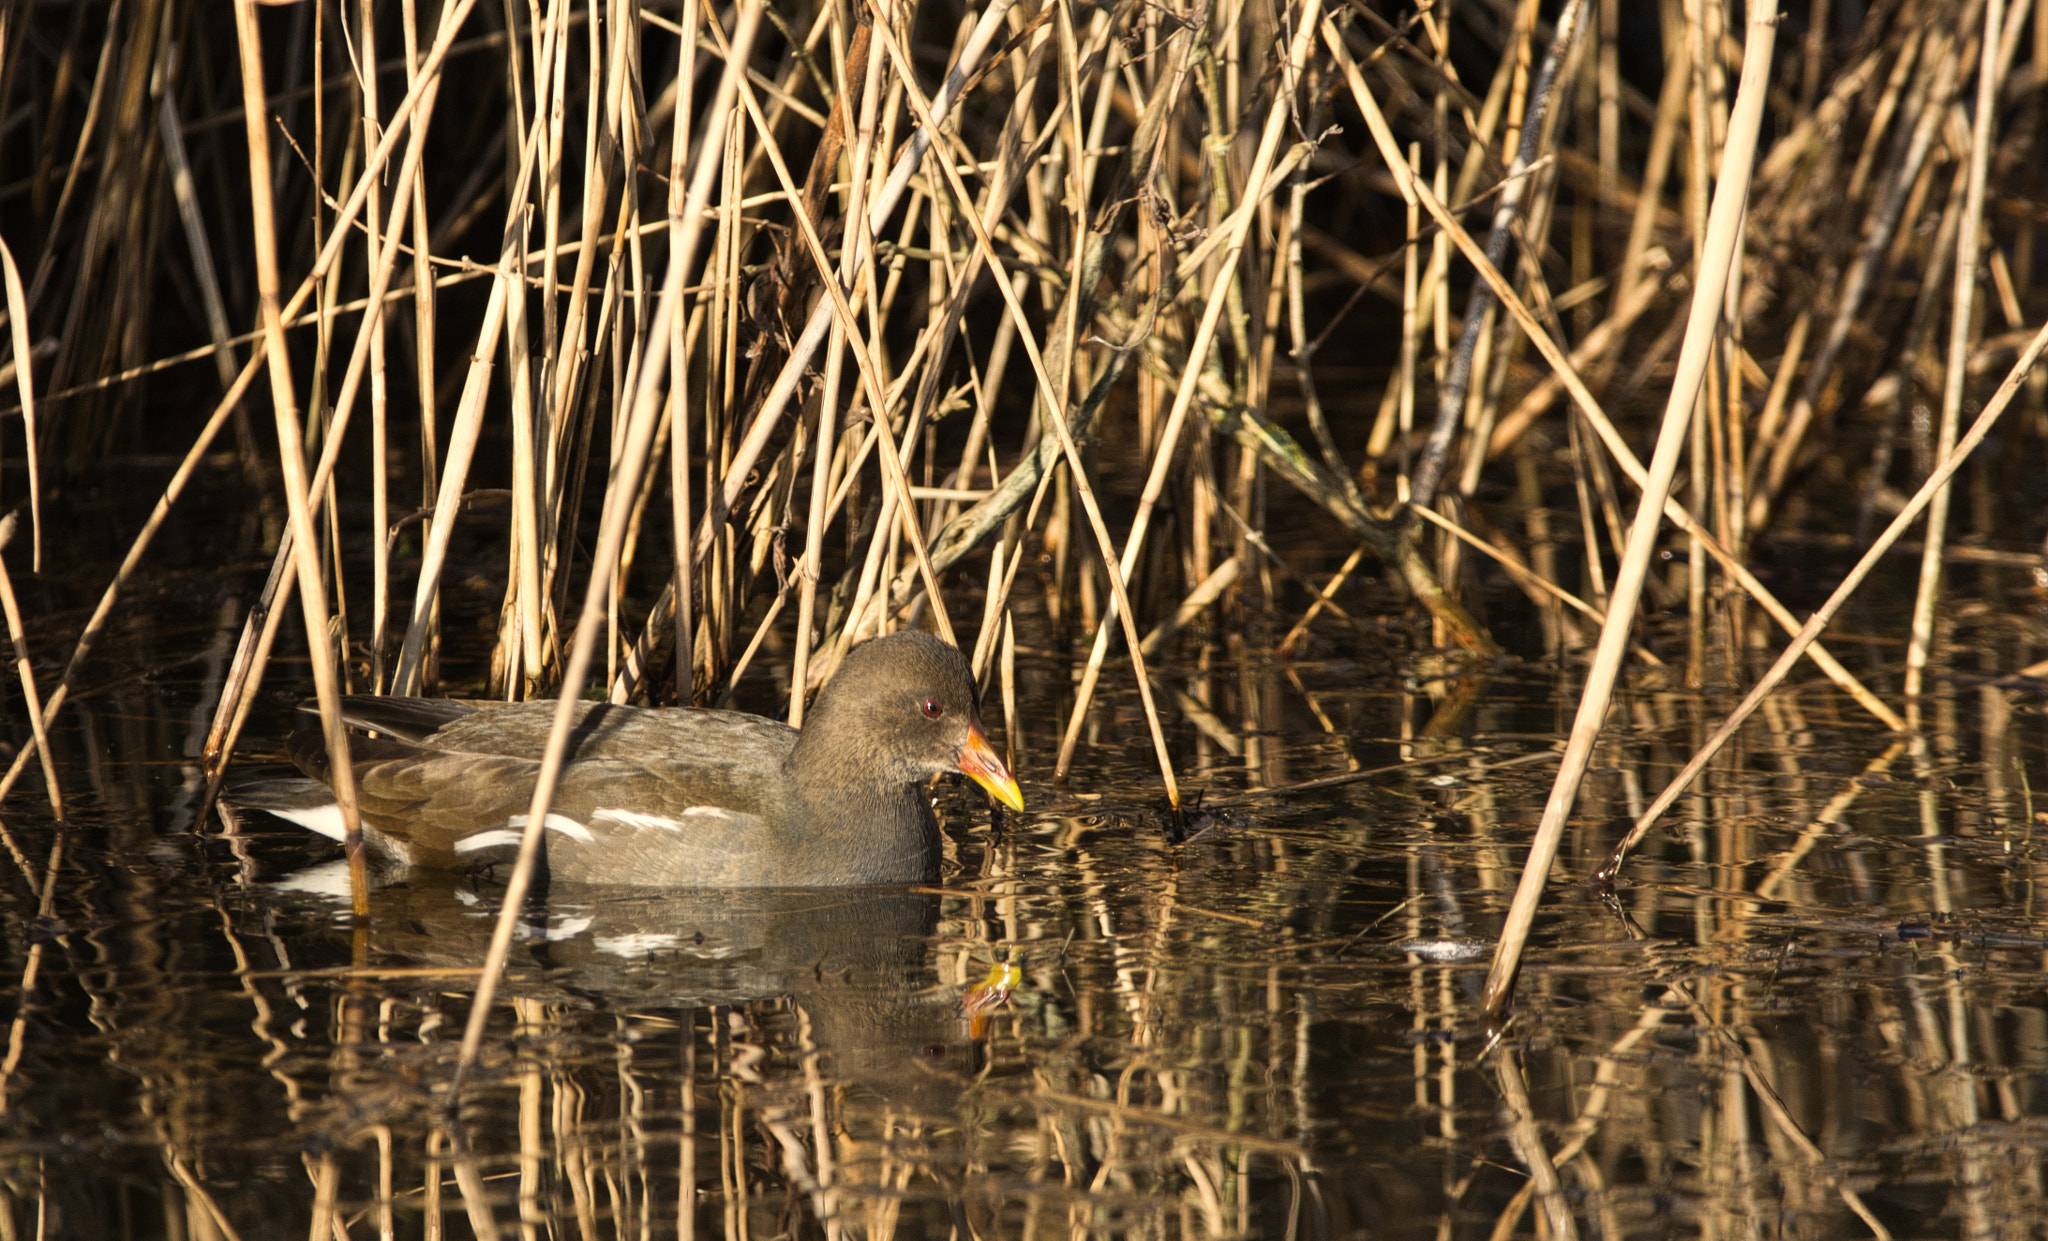 Nikon D7100 + Sigma 150-600mm F5-6.3 DG OS HSM | C sample photo. Female coot reflections photography